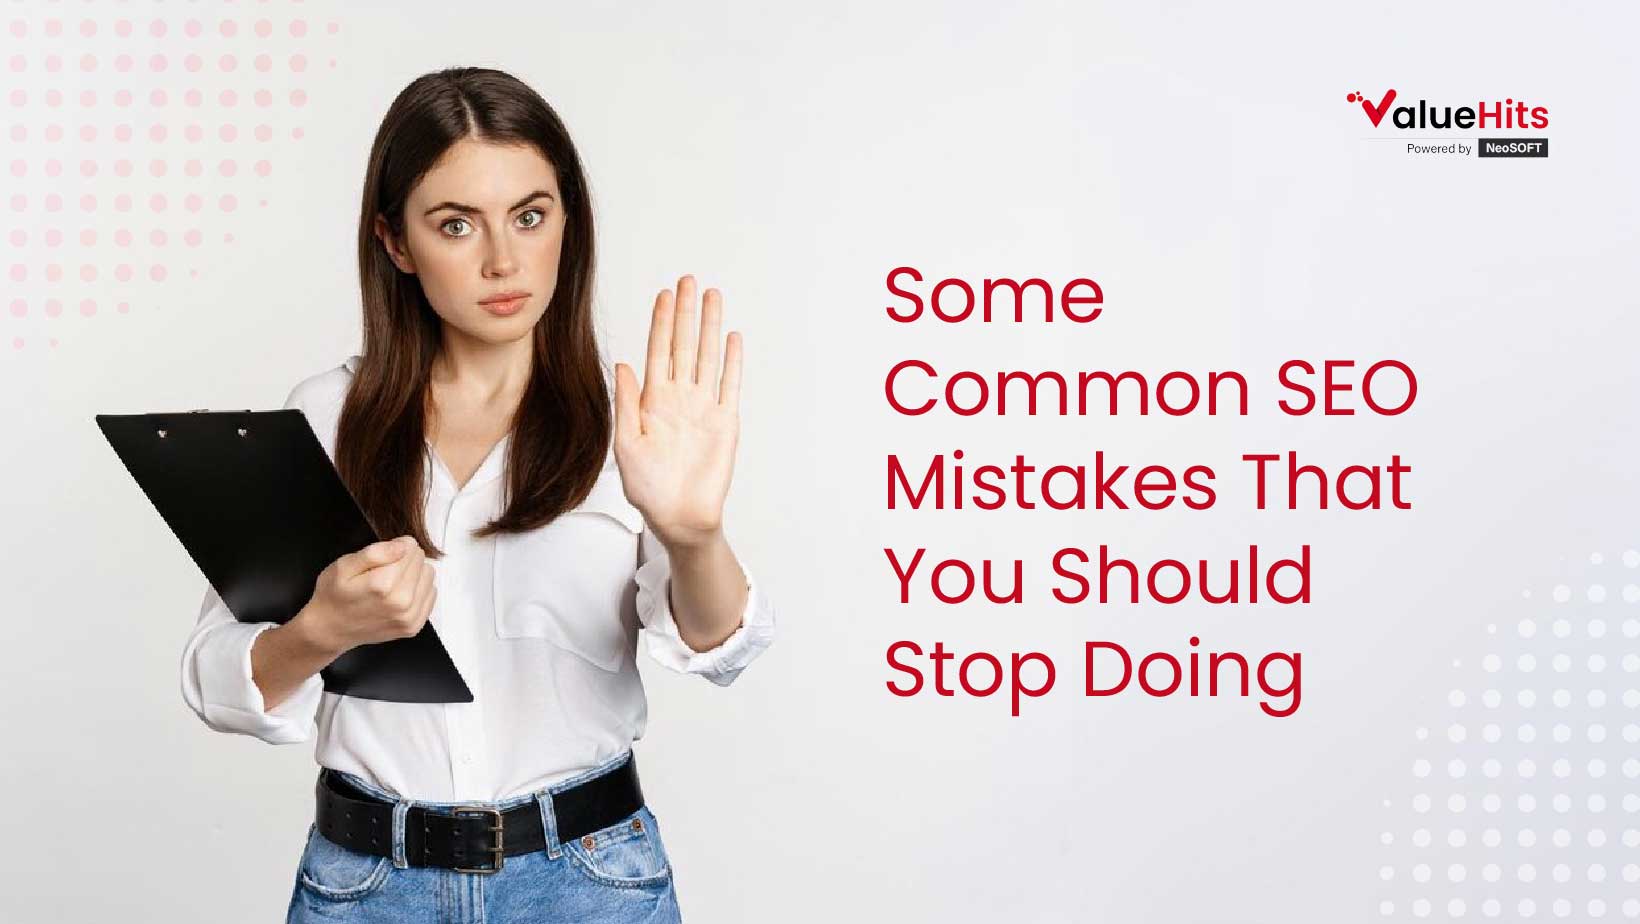 Some Common SEO Mistakes That You Should Stop Doing